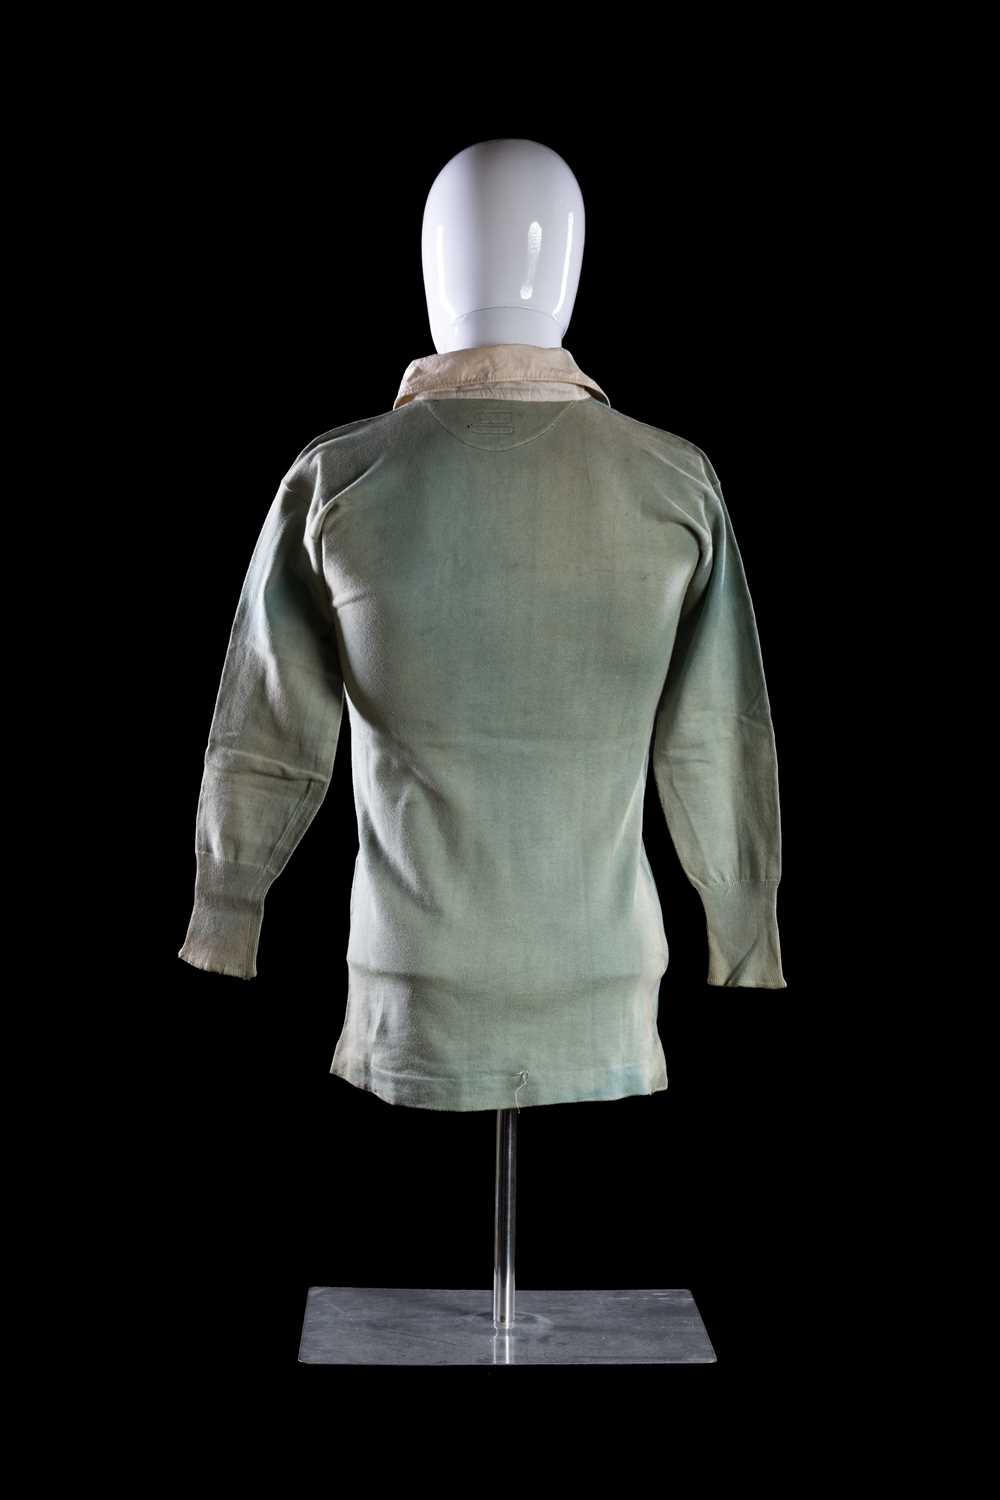 A 1906 IRELAND INTERNATIONAL RUGBY UNION JERSEY MATCH-WORN BY ALFRED TEDFORD (1877-1942) The - Image 2 of 4